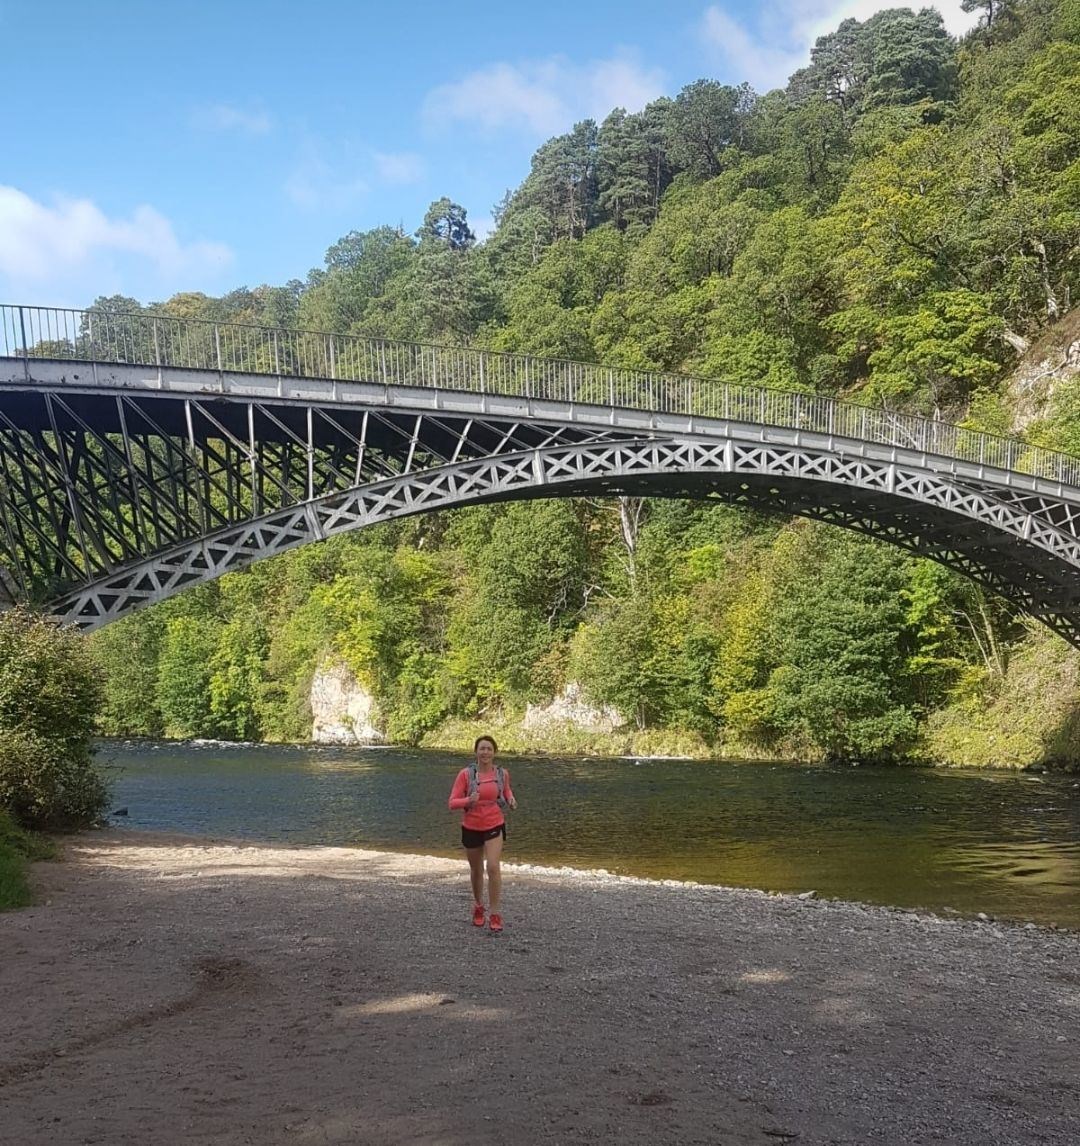 This route took Sally under Speyside's iconic Telford Bridge, which spans the River Spey at Craigellachie.